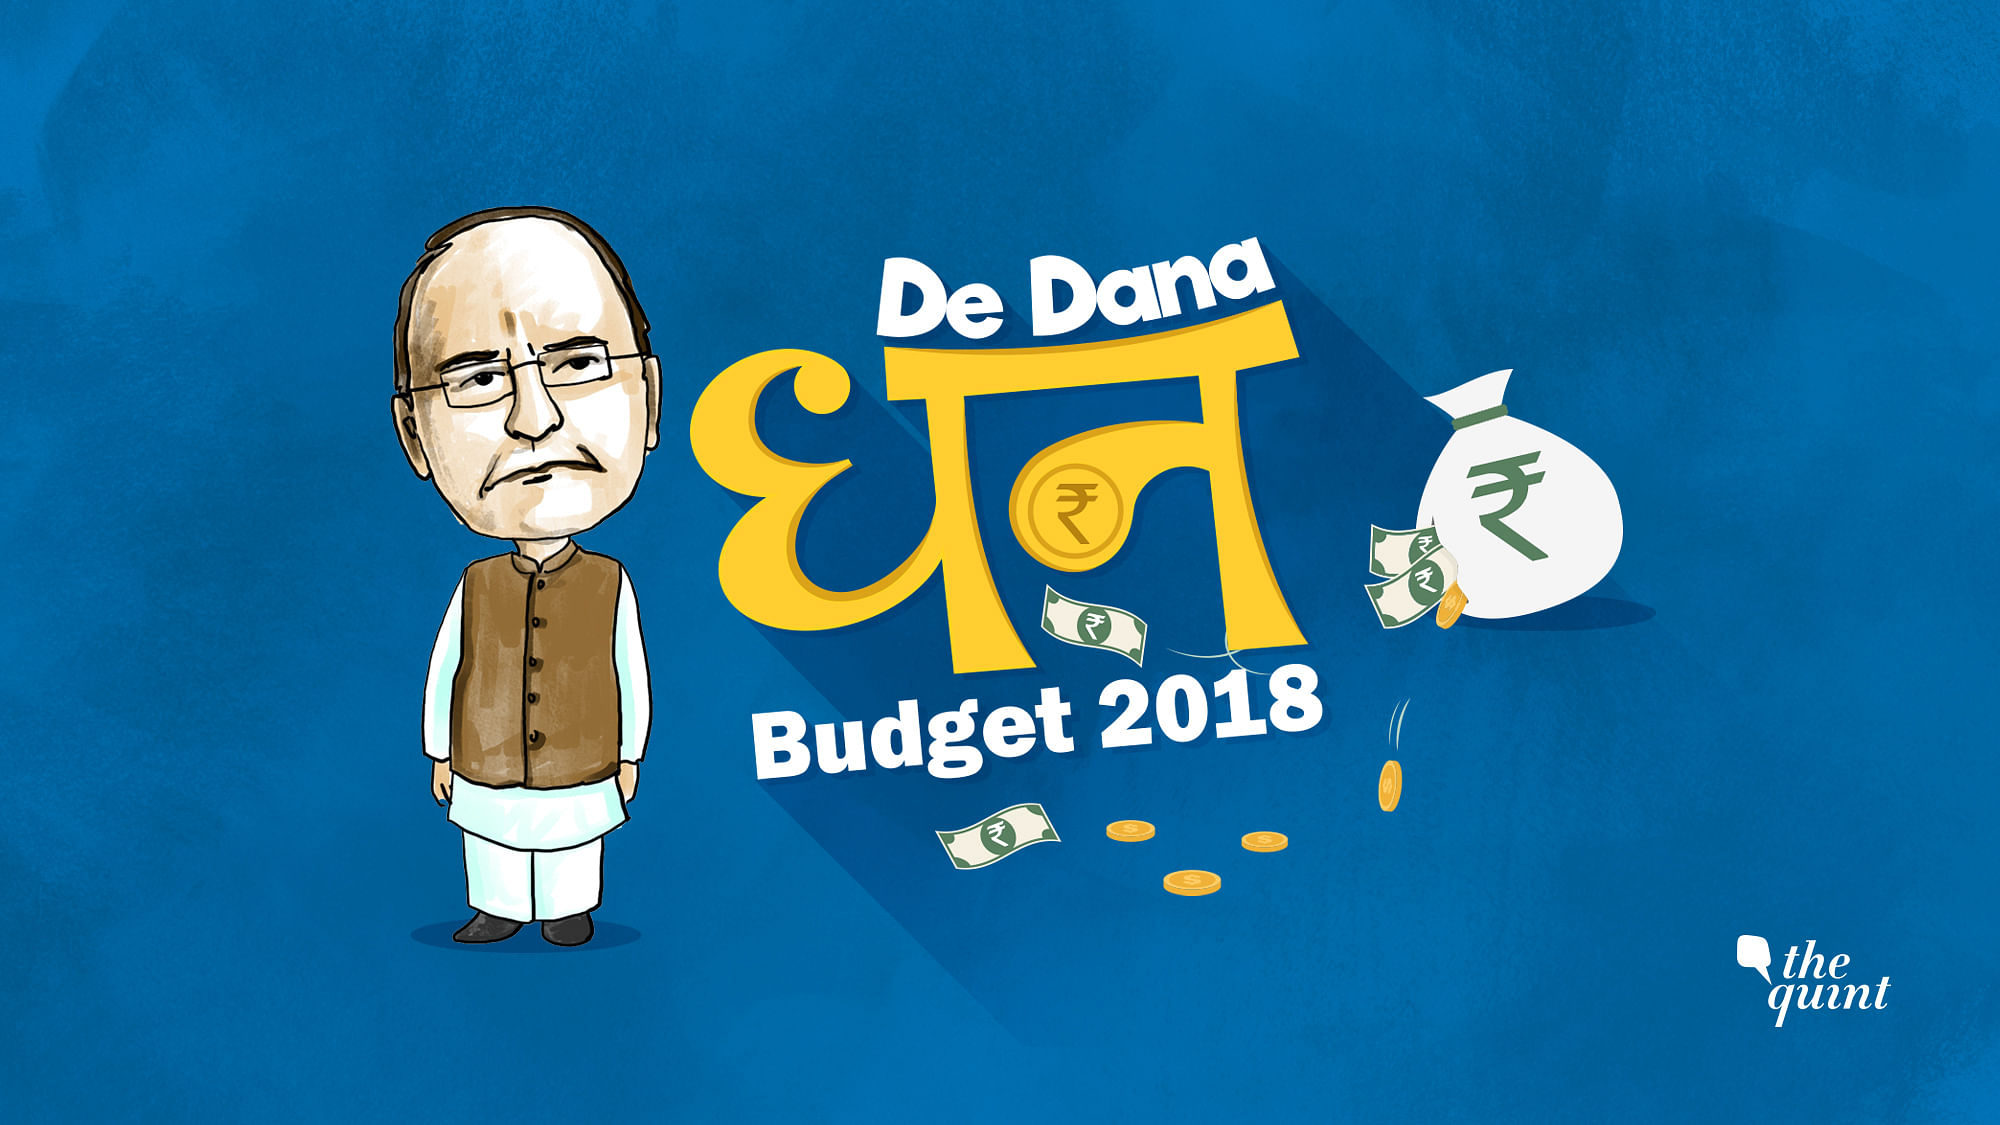 Finance Minister Arun Jaitley will present budget for the financial year 2018-19 on 1 February in the Parliament.